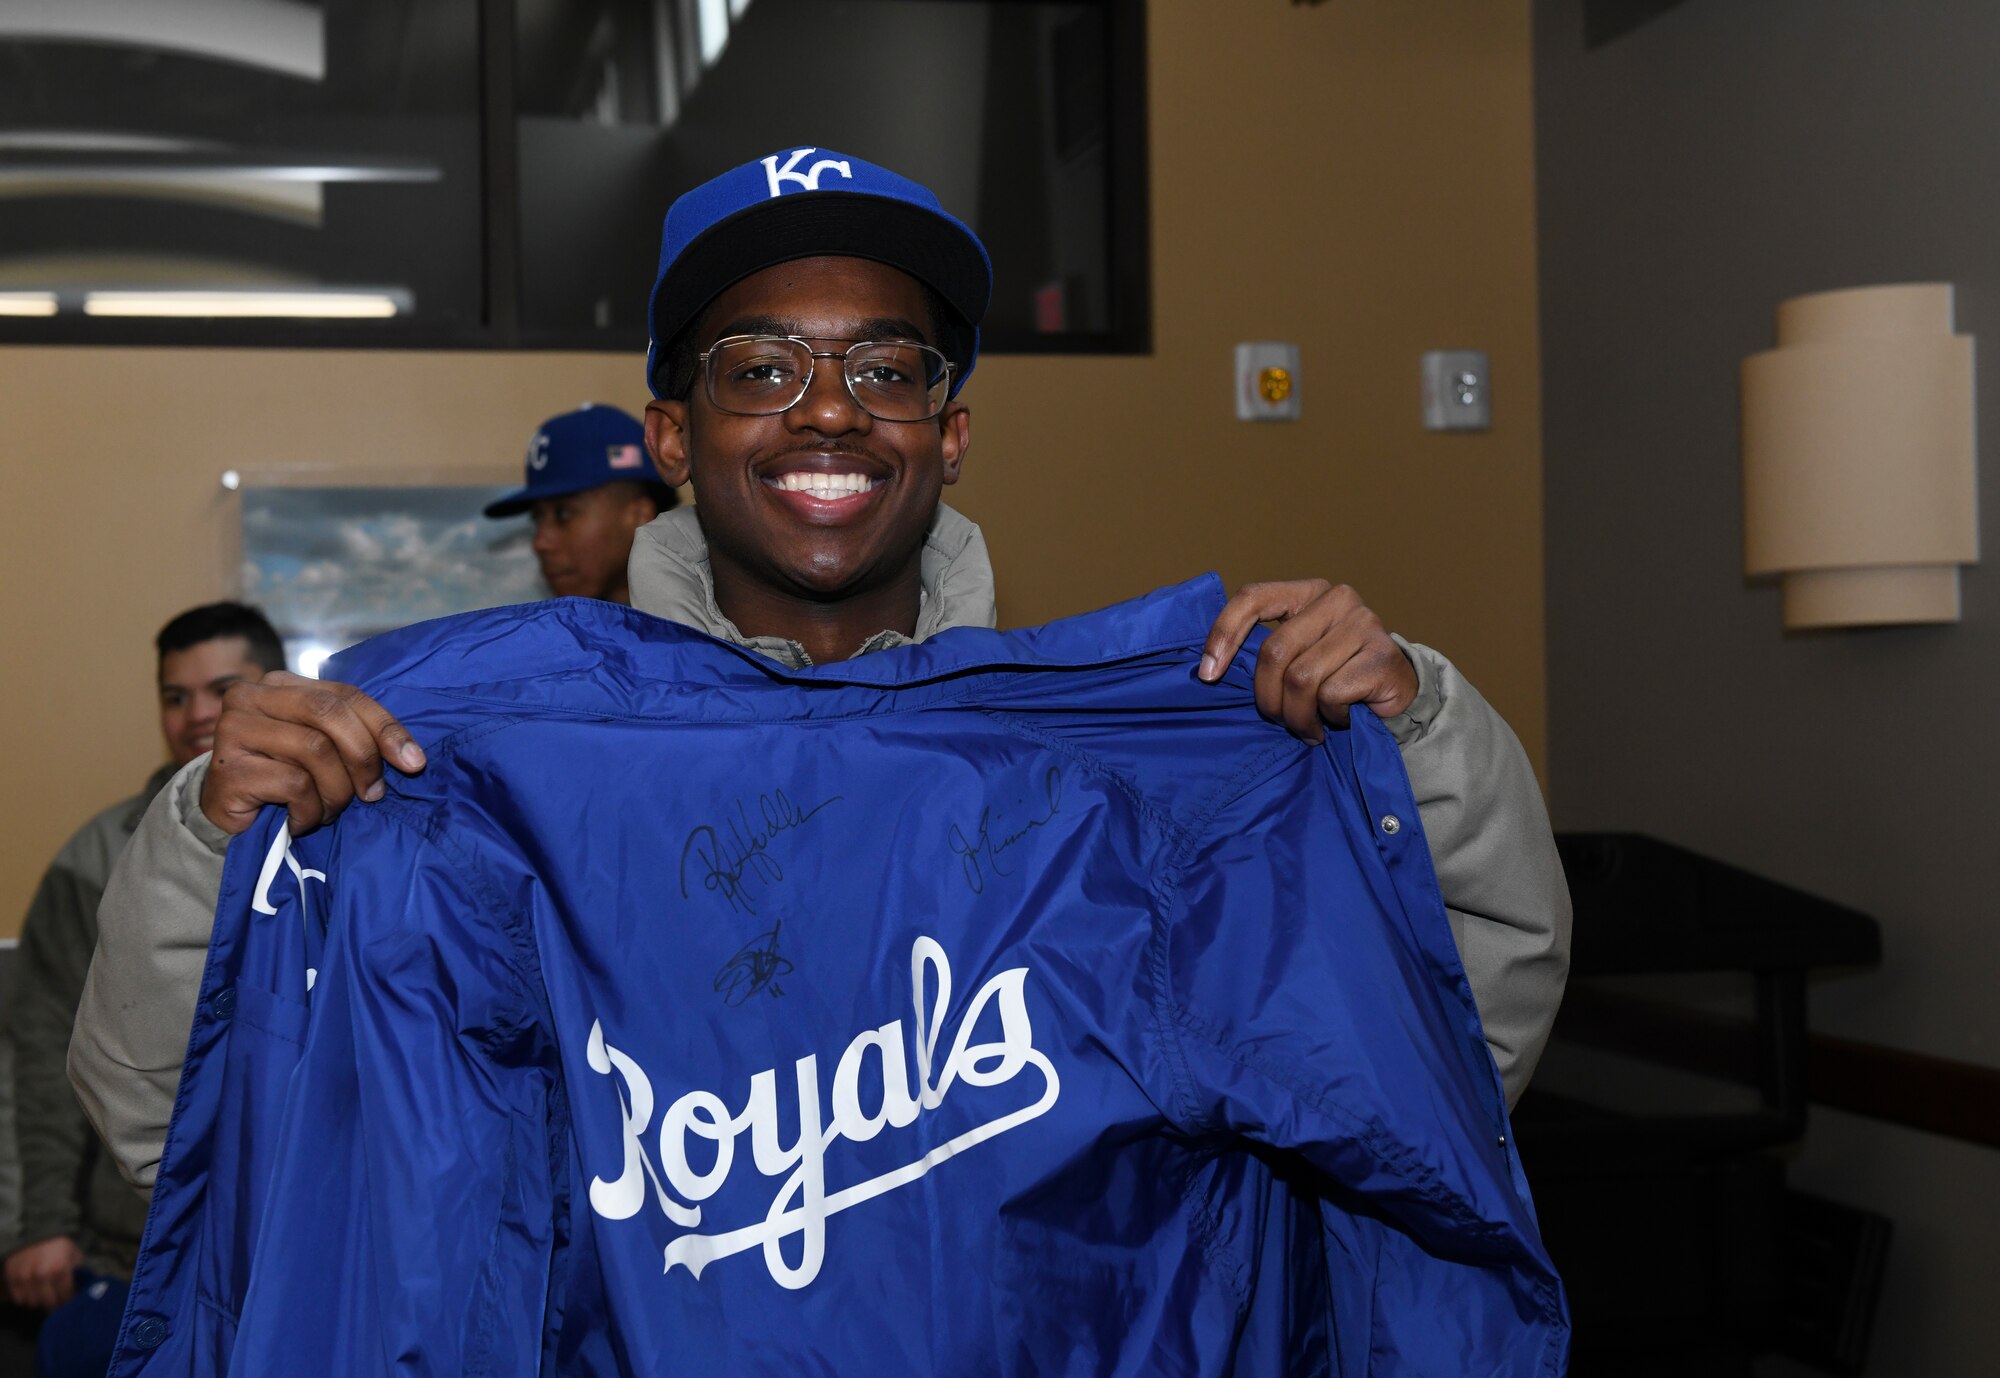 U.S. Air Force Airman 1st Class Marc Minor, a 509th Aircraft Maintenance Squadron weapons load crew member, poses with his Kansas City Royals-signed jacket at Whiteman Air Force Base, Mo., Jan. 30, 2020. Airmen brought various personal items to be signed by the Royals team. (U.S. Air Force photo by Staff Sgt. Sadie Colbert)